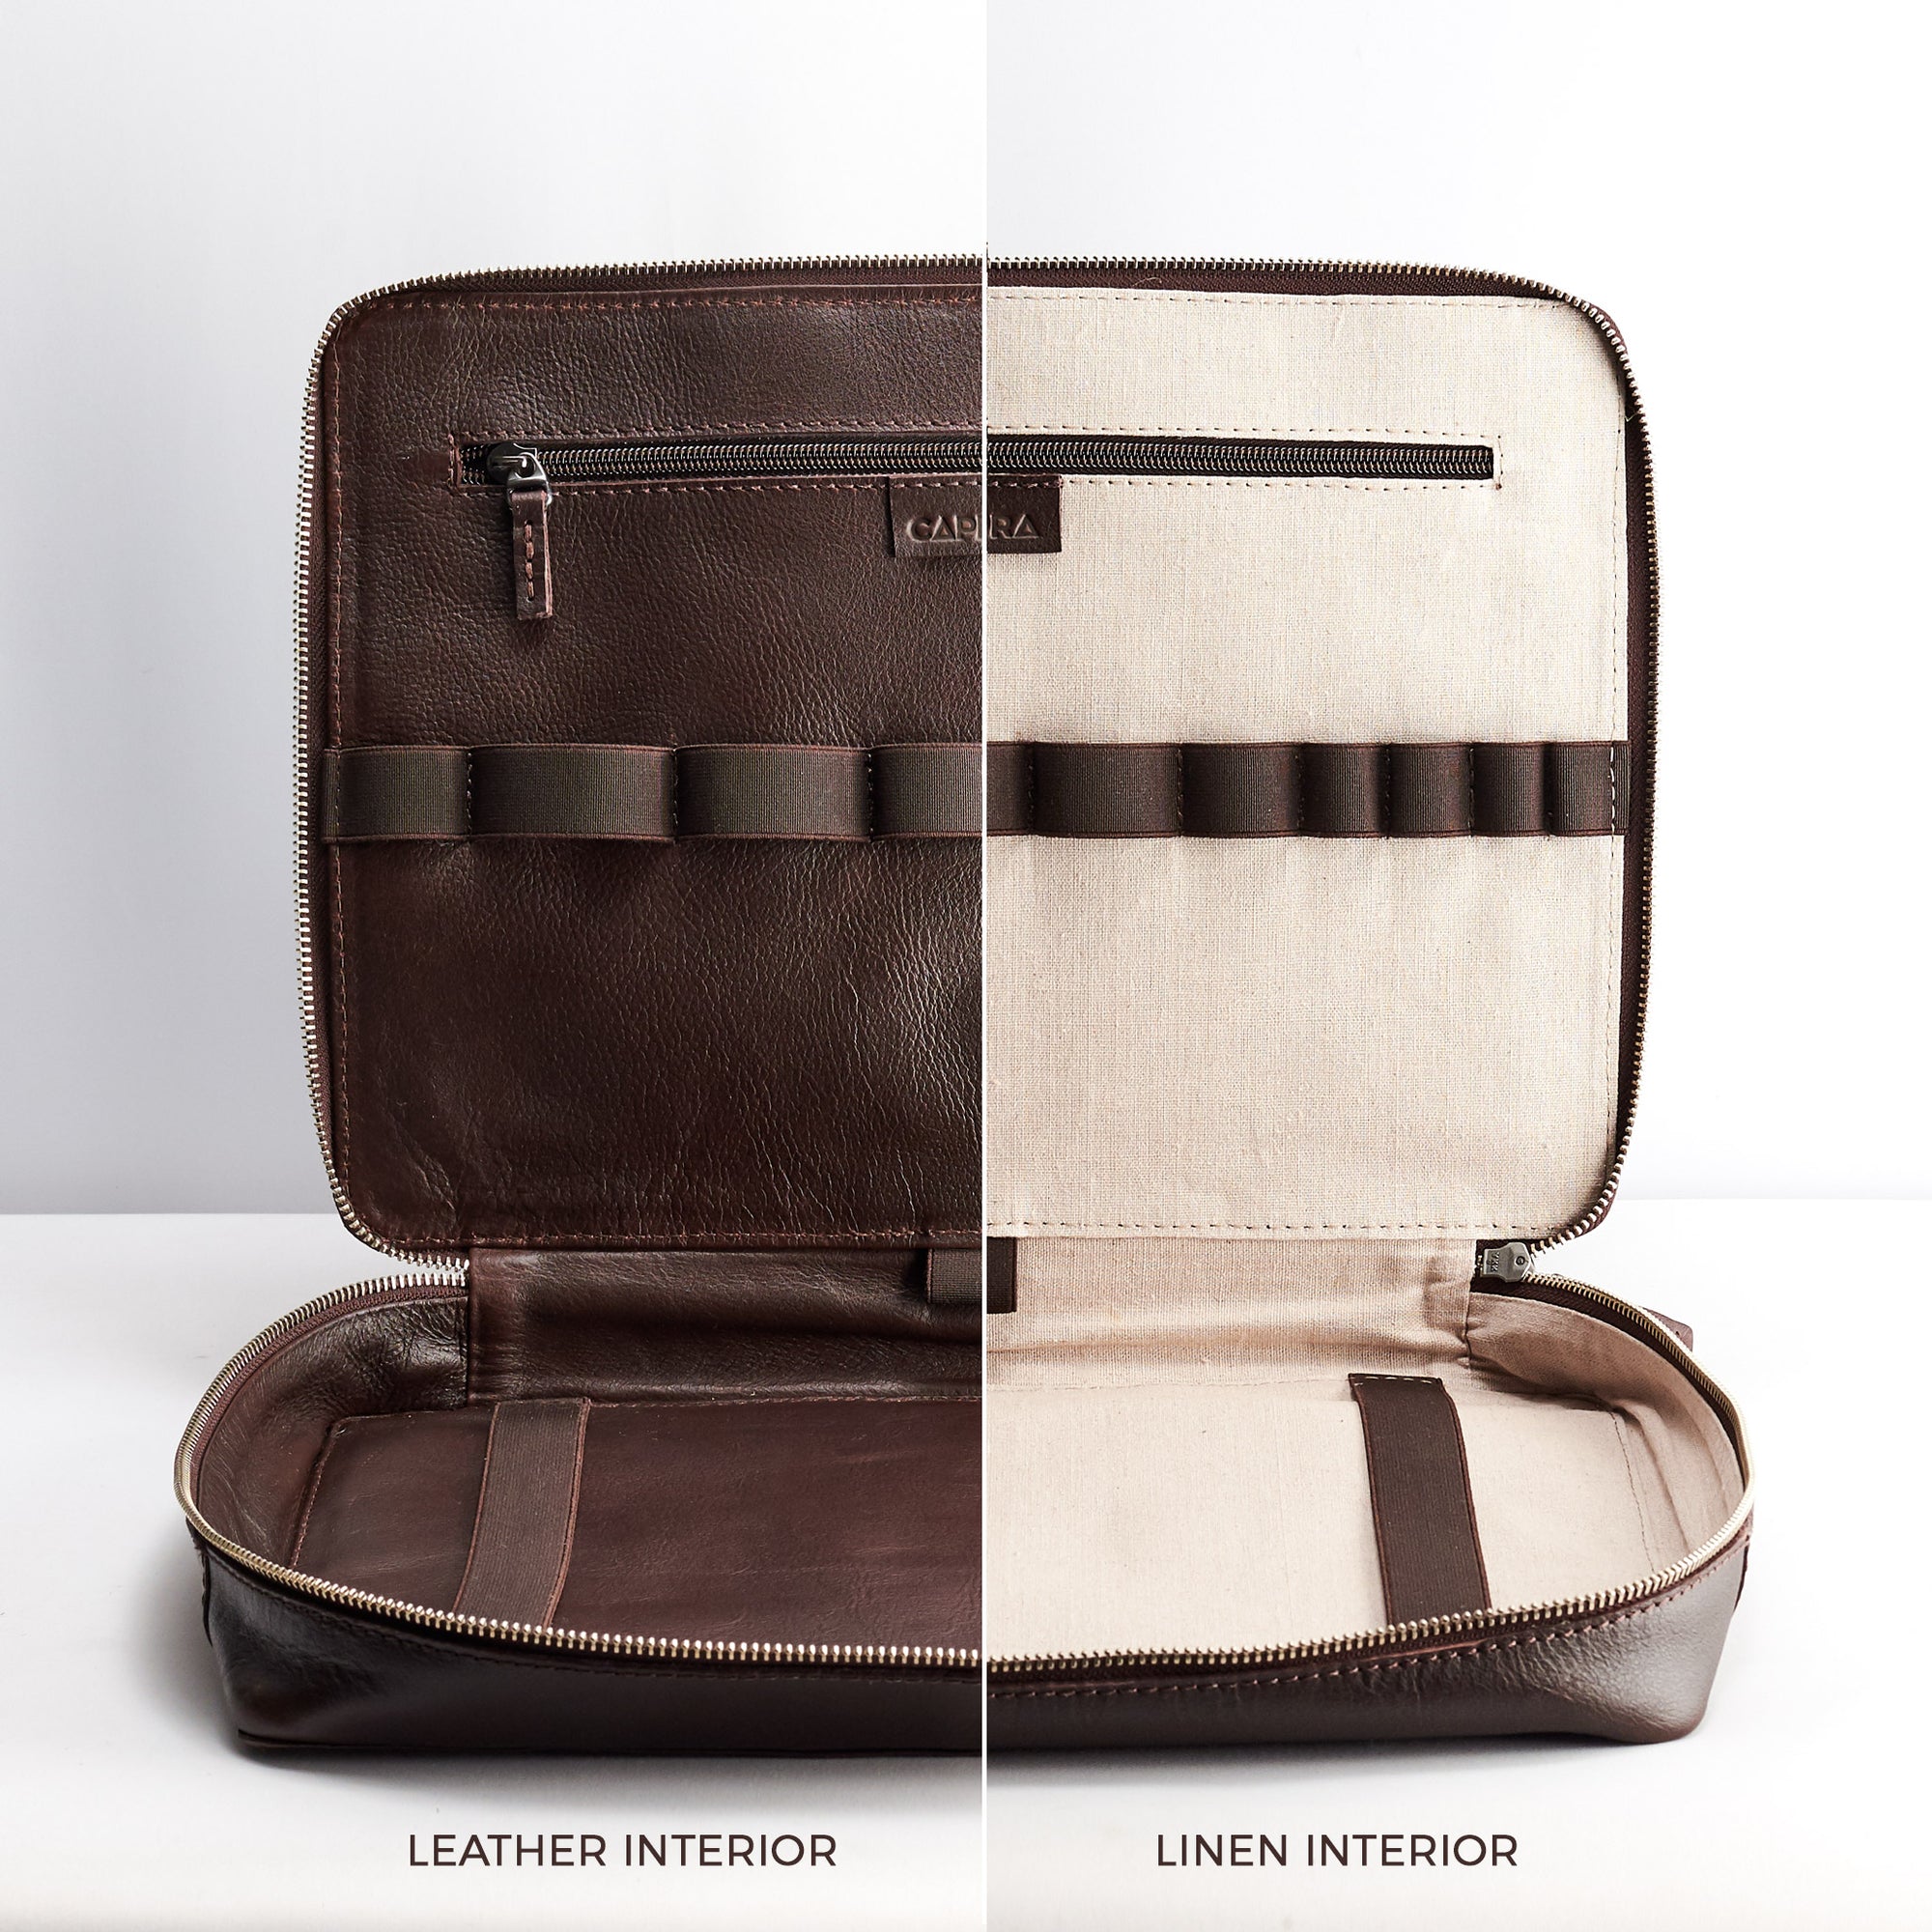 Linen or leather interior. Dark brown EDC bag essentials by Capra Leather.